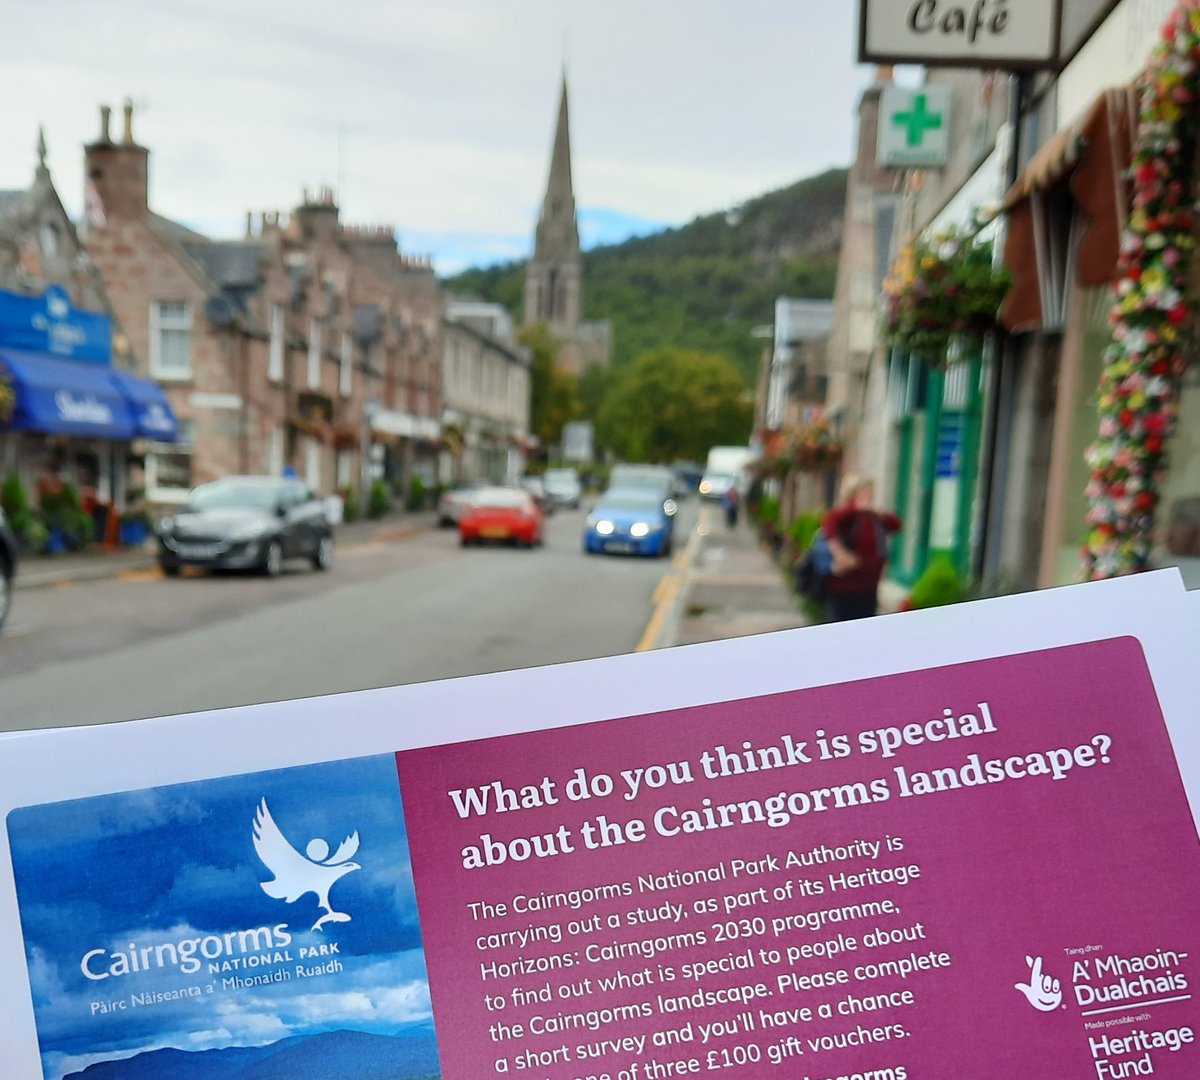 If you're in Ballater today you might see some of us in the village centre asking what you think is special about the Cairngorms landscape. If you see us, tell us your views! #Cairngorms2030 #HeritageHorizons @HeritageFundSCO